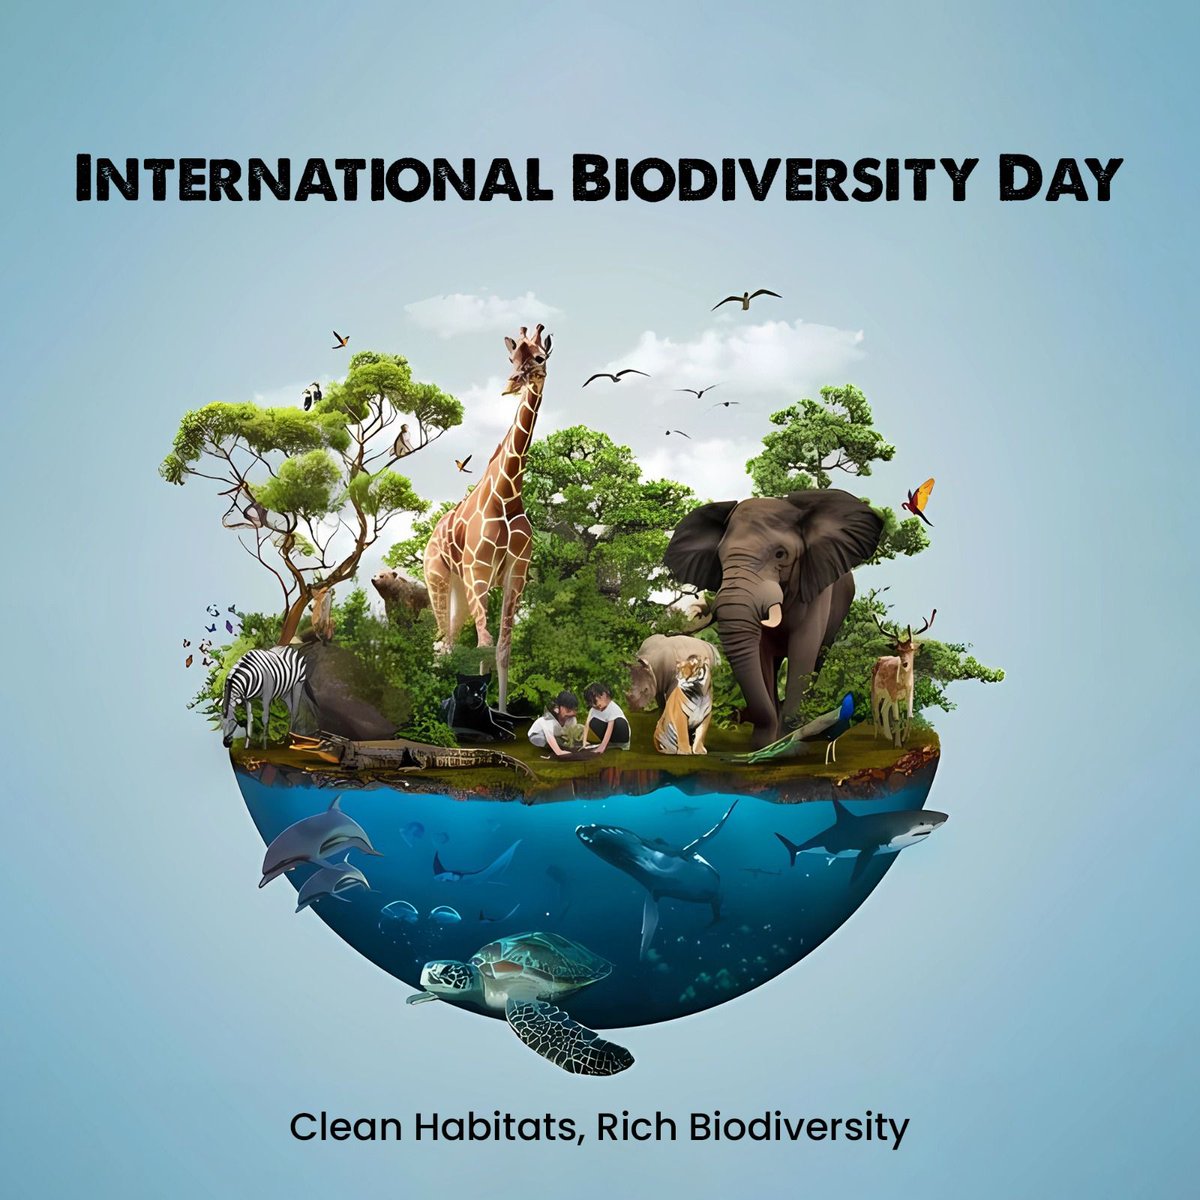 Let's unite to protect biodiversity, promote sustainable agriculture, and fight climate change. On 'International Biodiversity Day', let's do our part to keep our planet clean and green for a healthier future. #InternationalBiodiversityDay